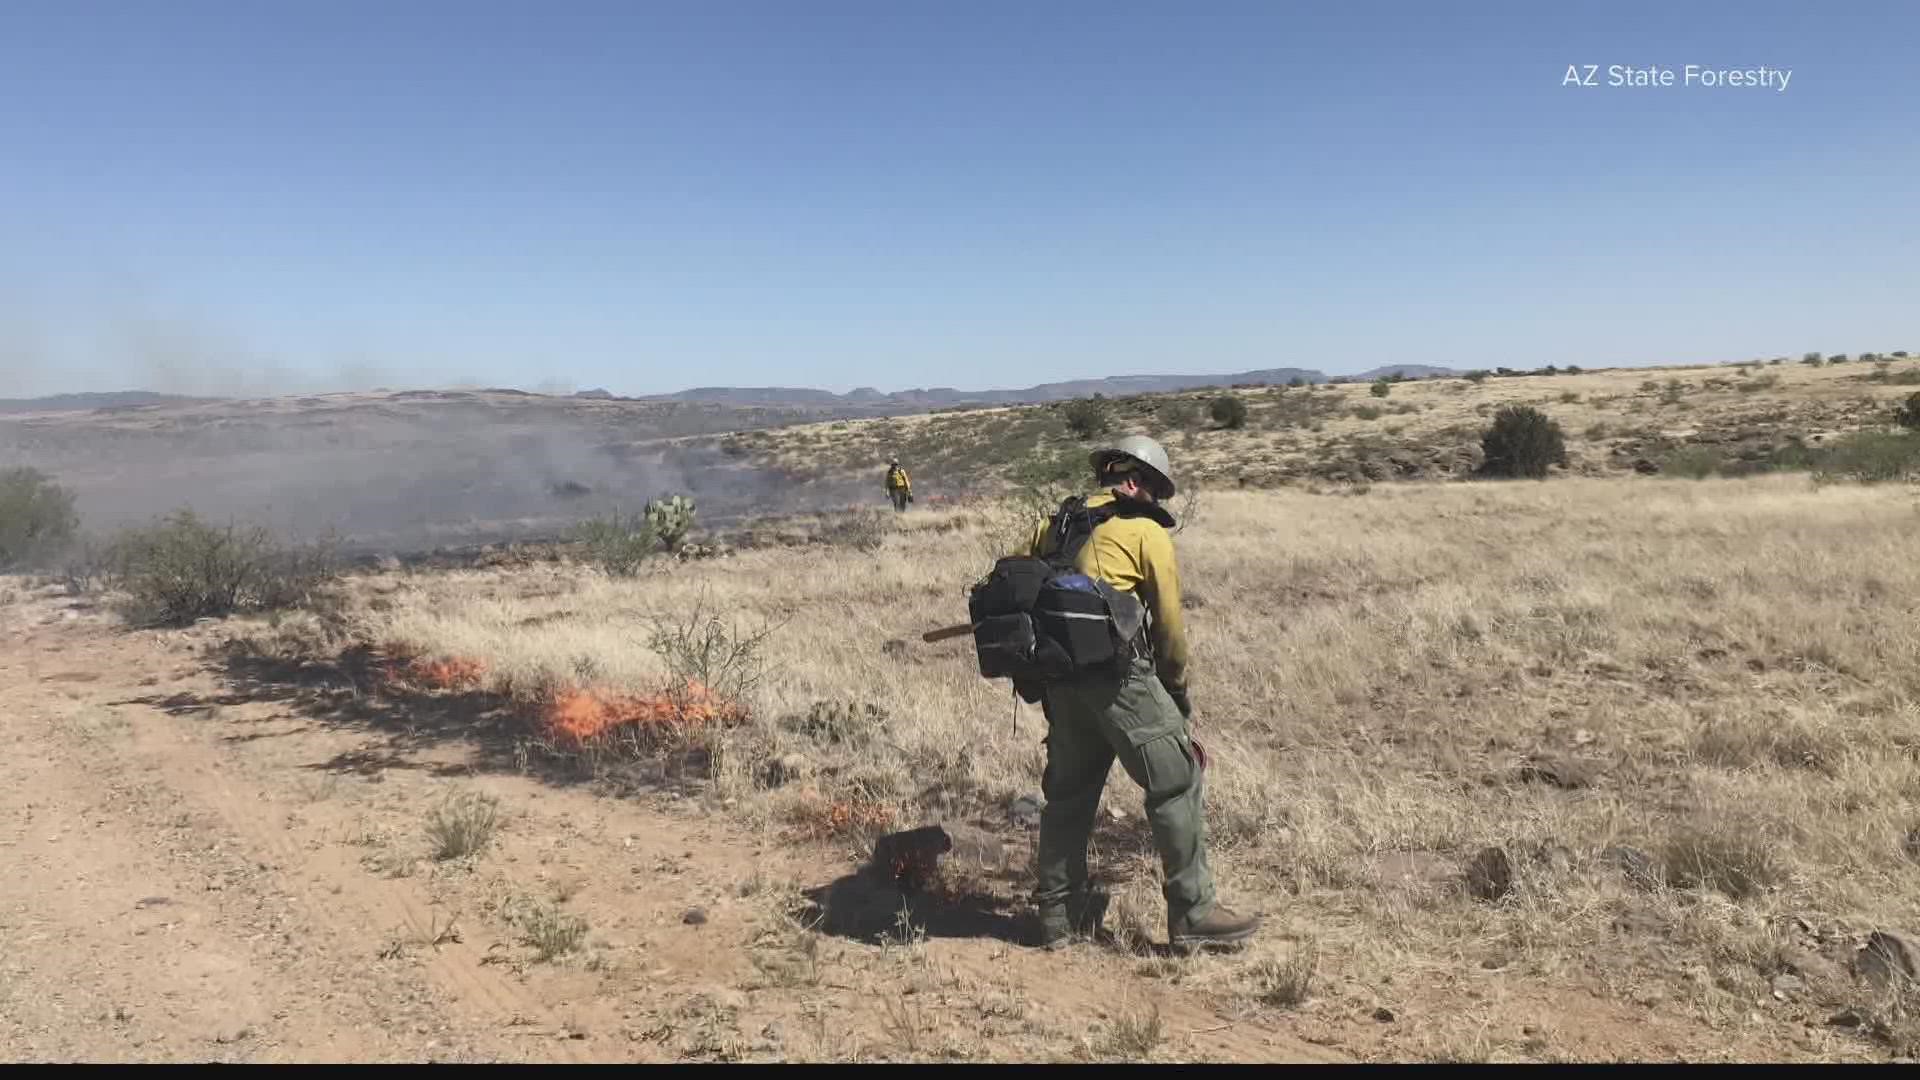 The Arcosanti Fire is burning north of the Valley. It has burned 60 acres of grass and brush. There are no closures in effect and no evacuations at this time.